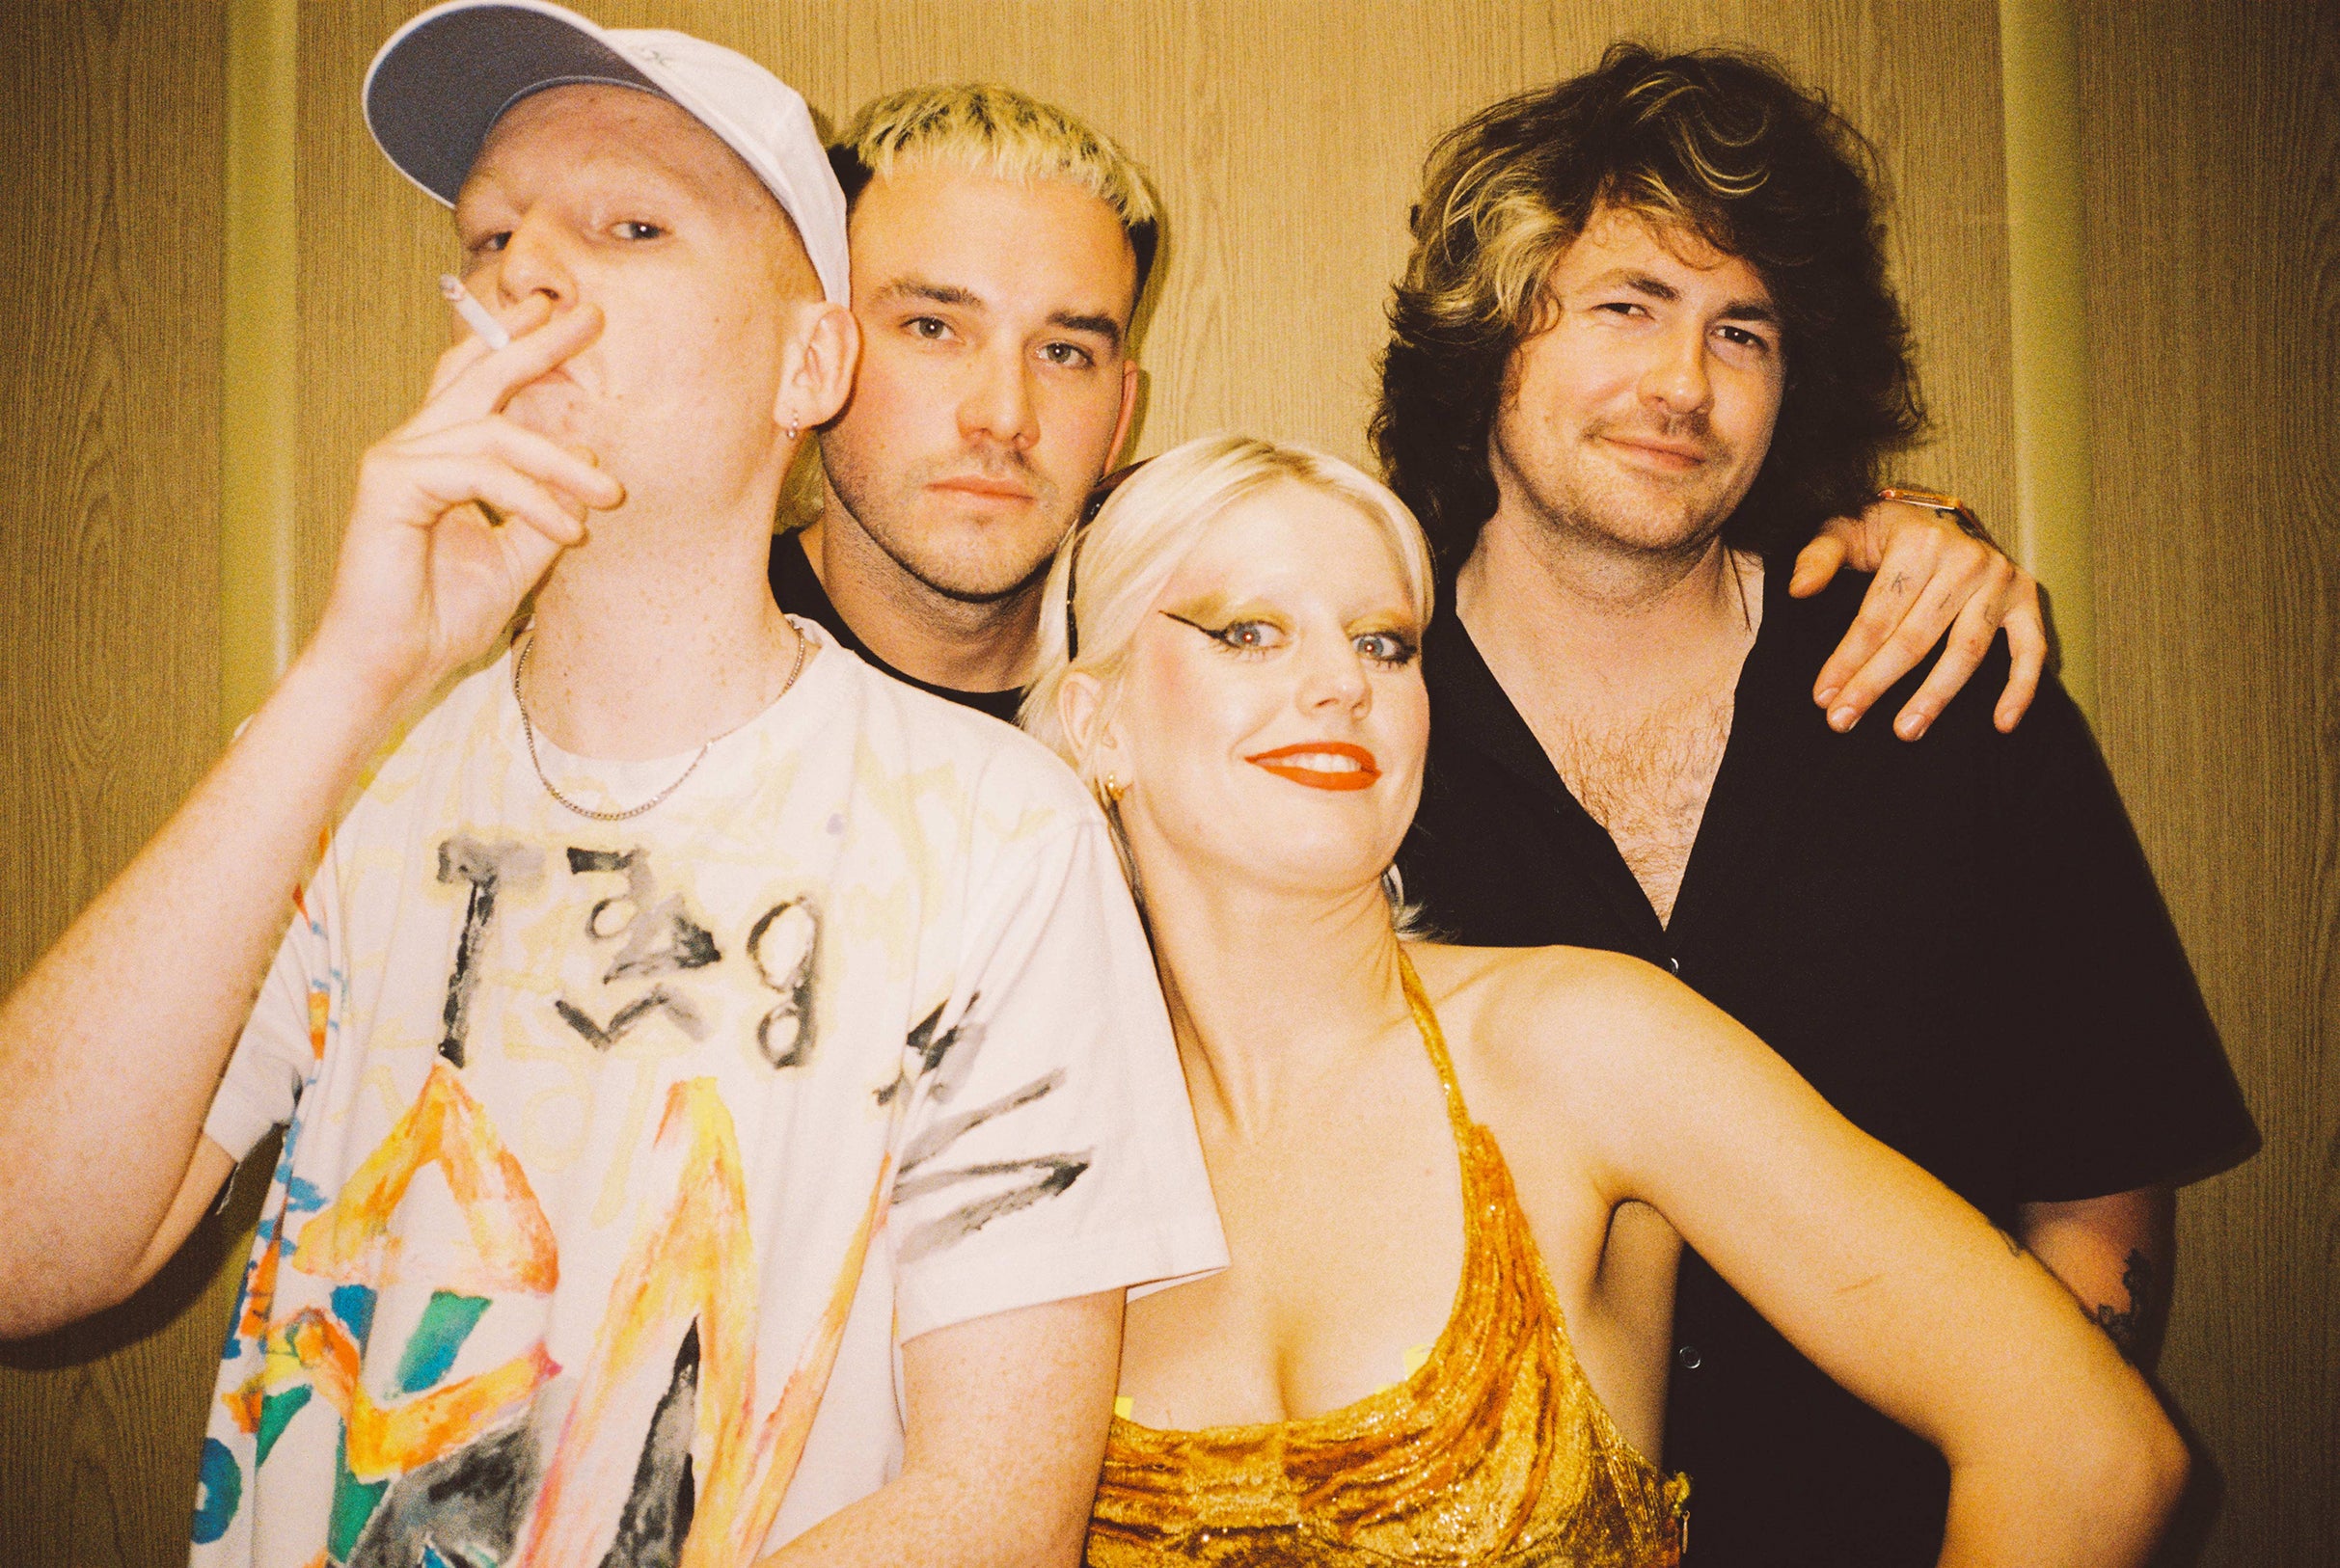 Amyl and the Sniffers at The Sound